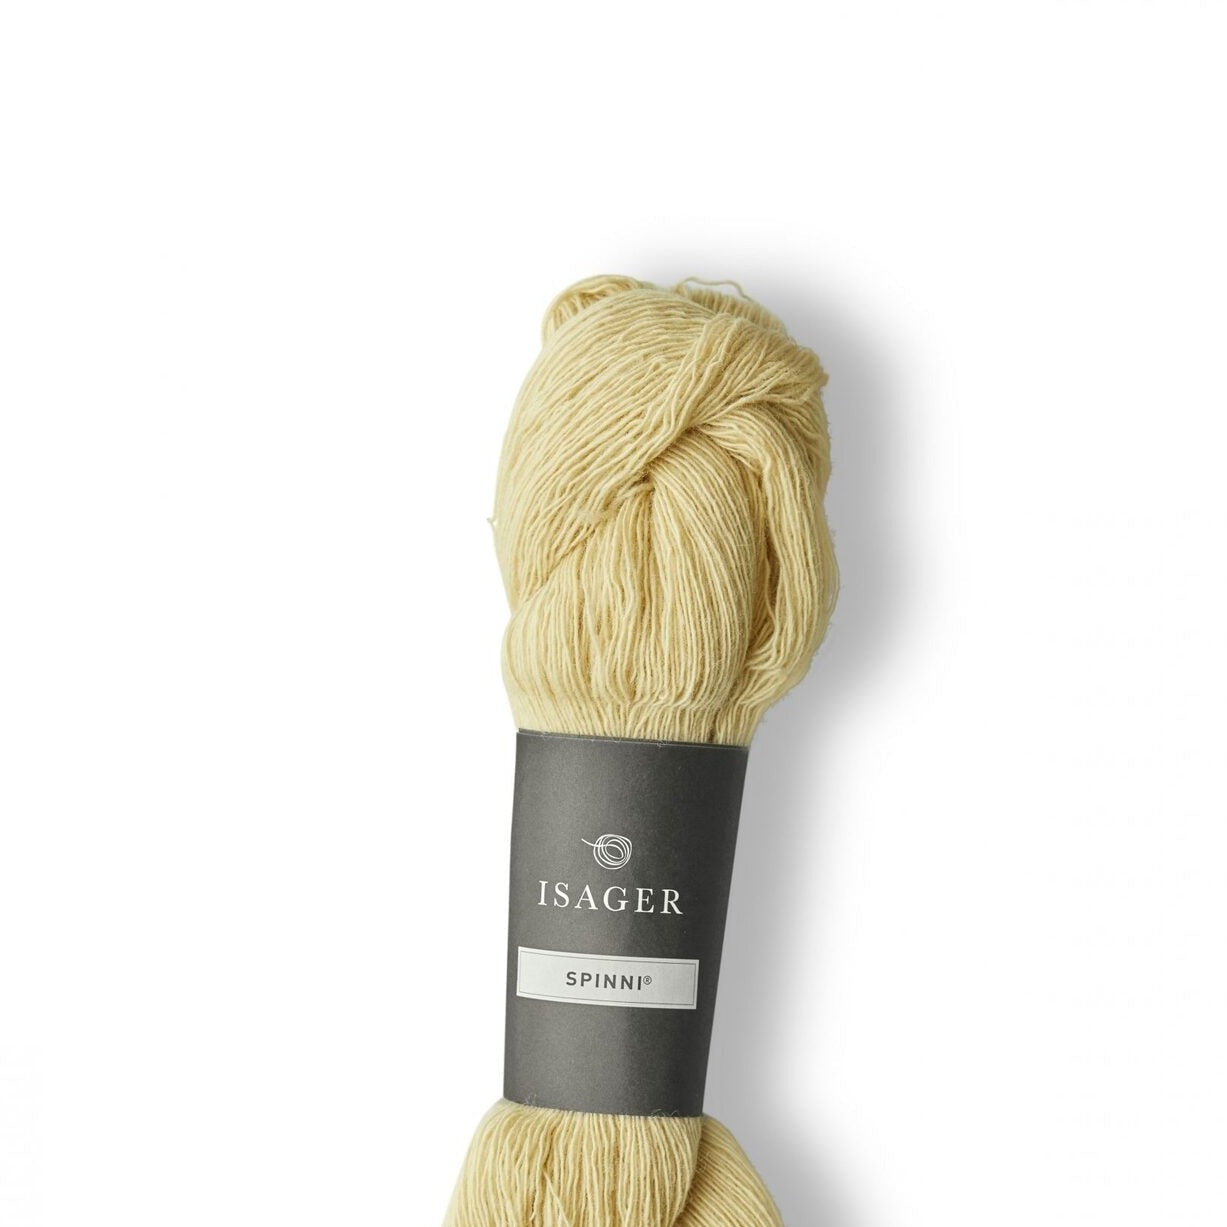 Isager Spinni - 58 - 2 Ply - Isager - The Little Yarn Store